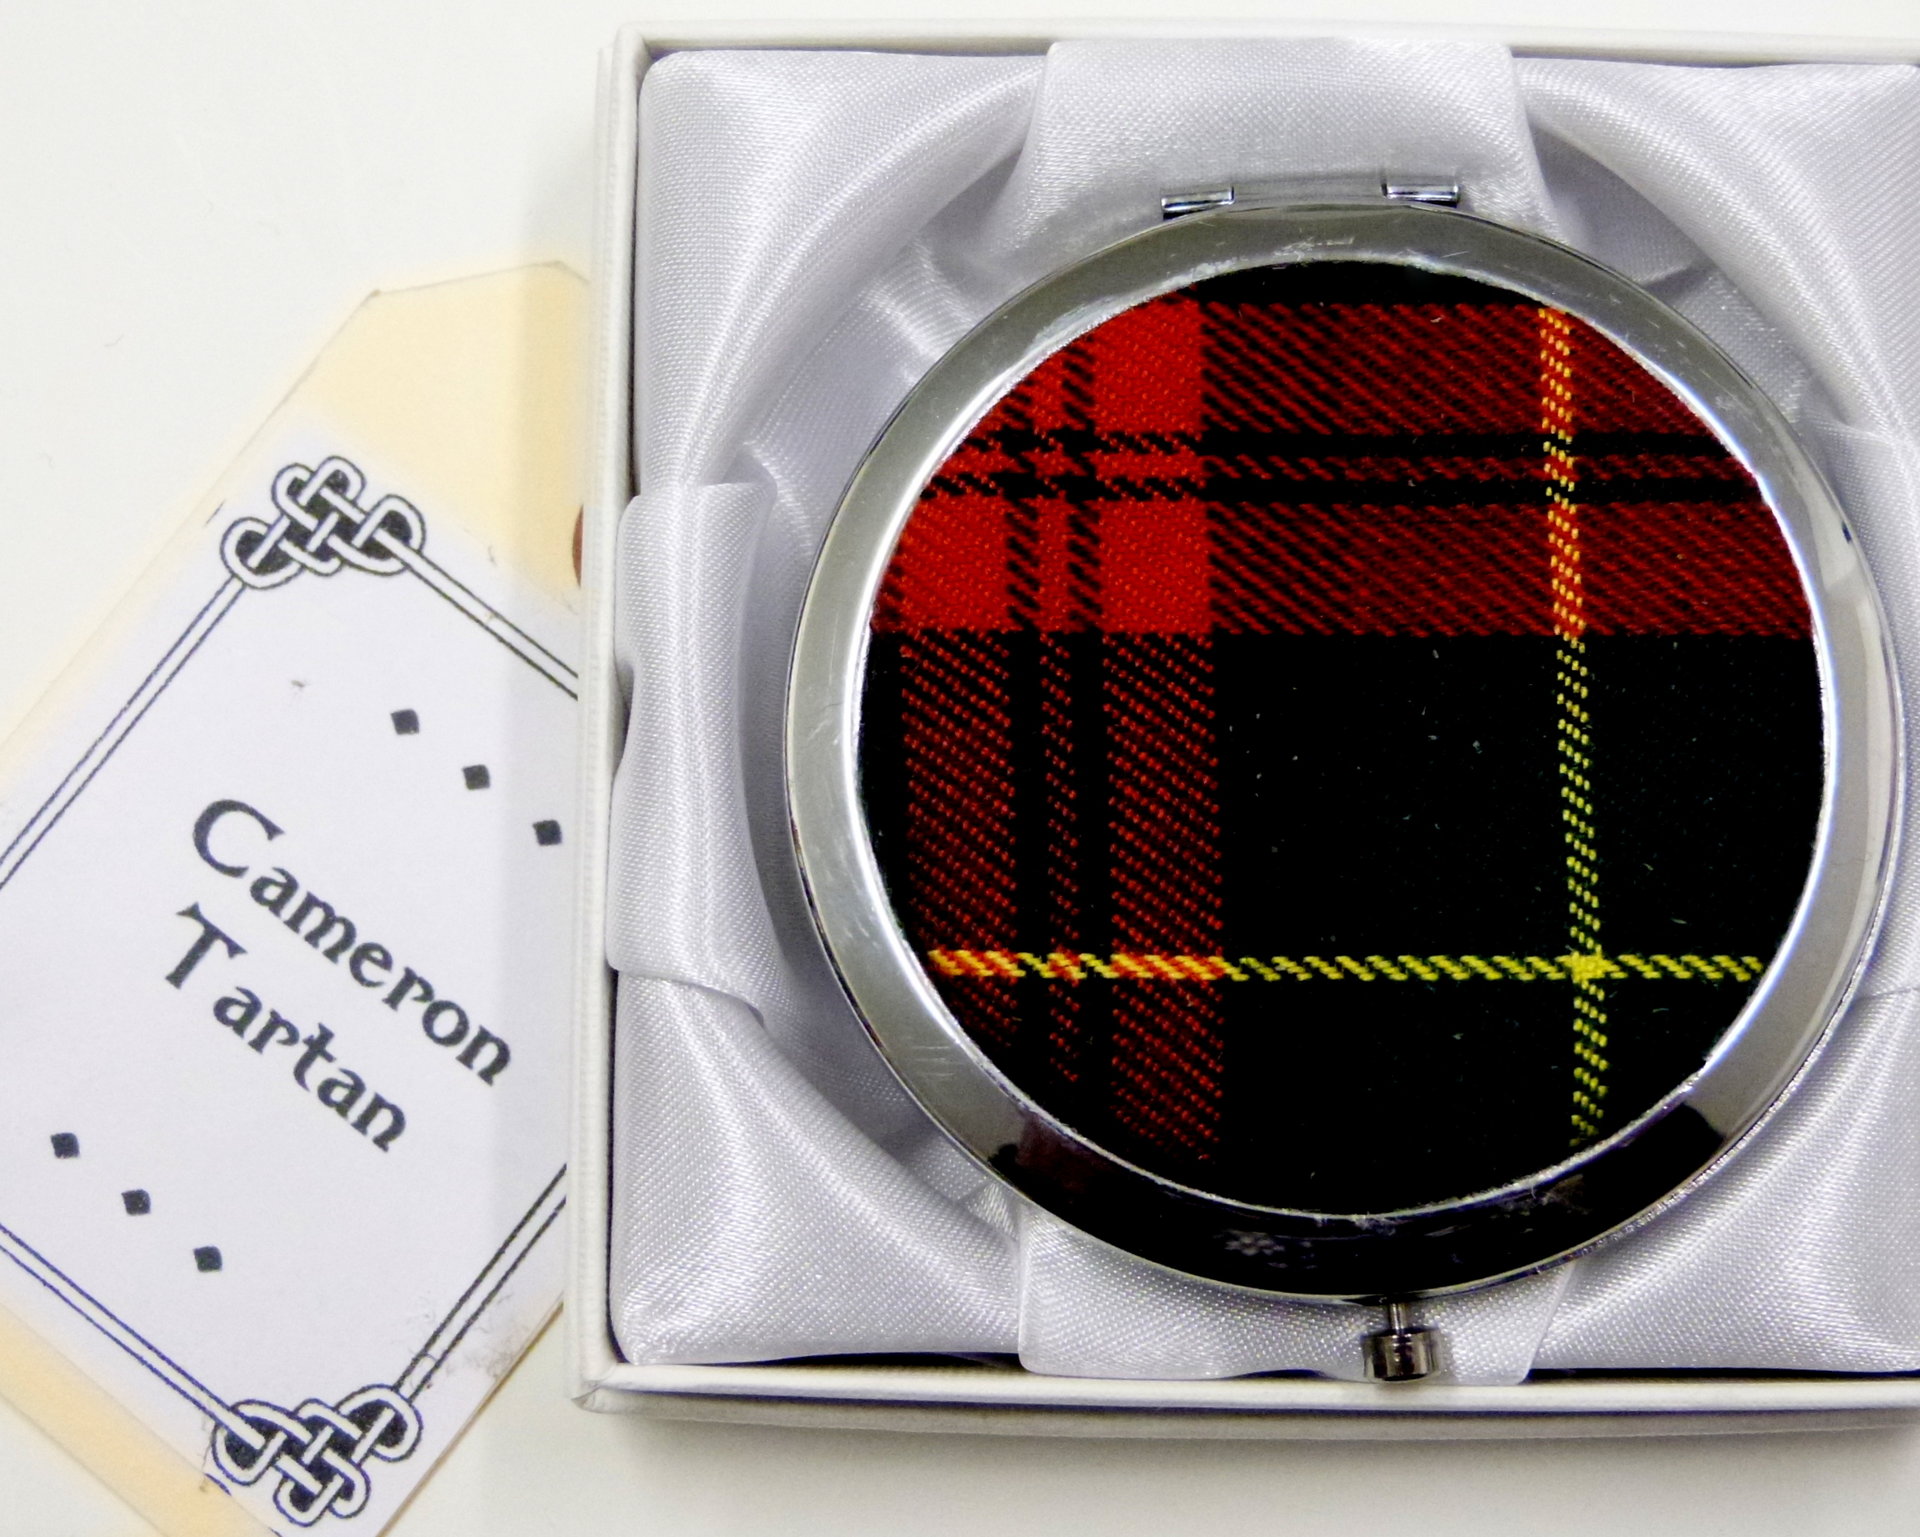 Cameron tartan compact mirror, womens little gift for mother, sister, best friend made in Scotland by Tweed with a Twist